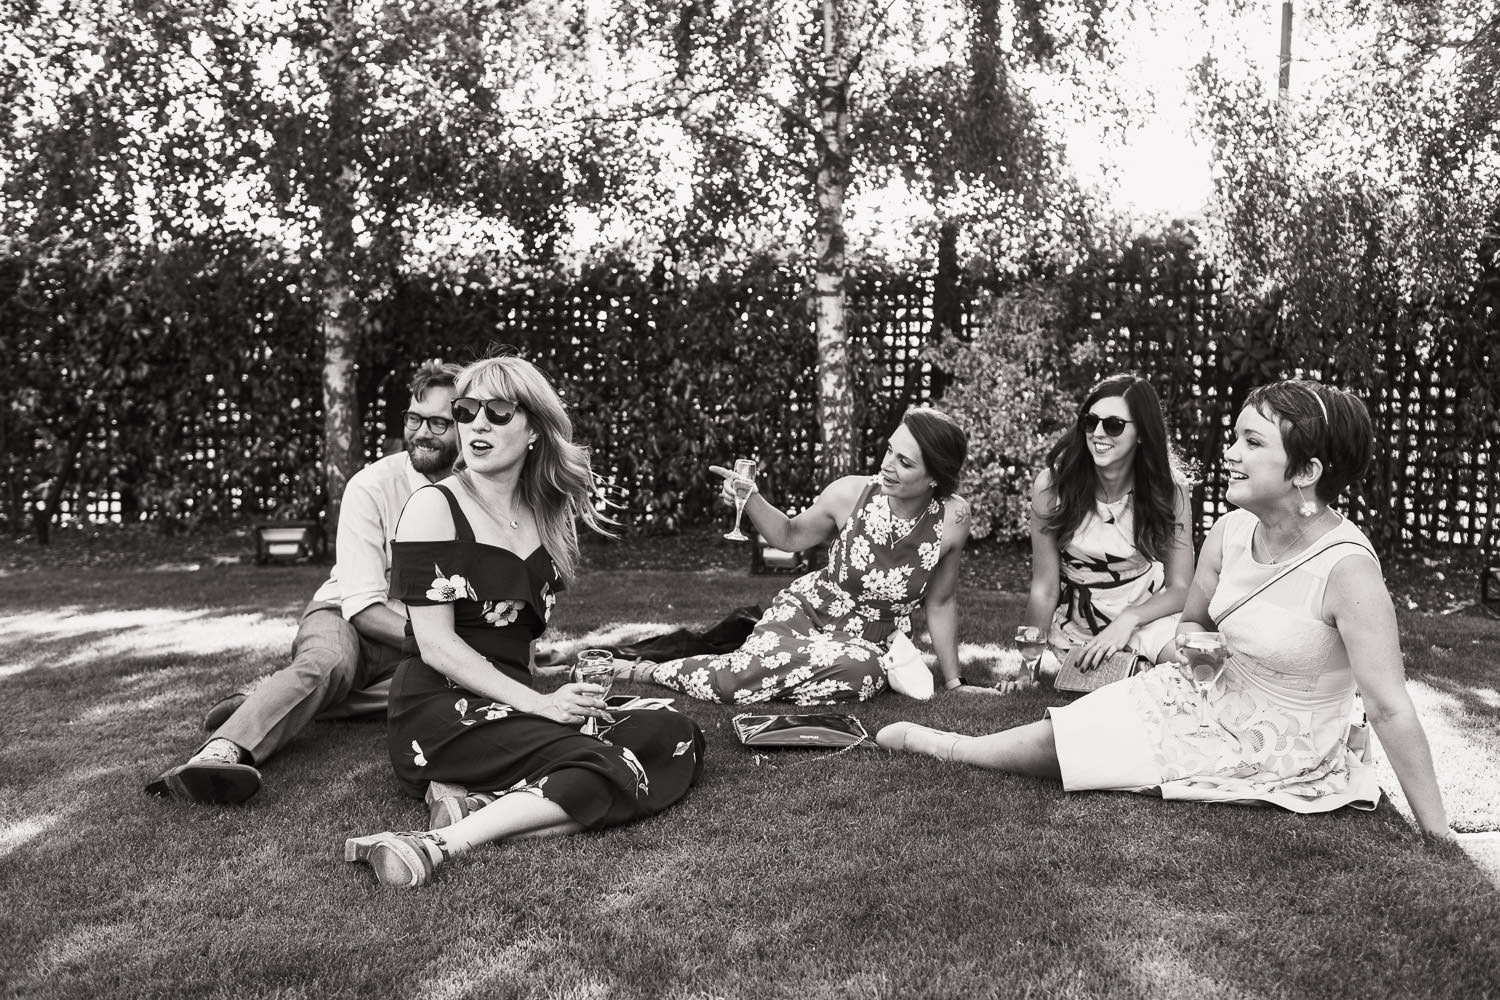 Five wedding guests sat on the grass on a warm day at Crondon Park venue near Chelmsford. Woman with long hair is wearing Warehouse, BUTTERCUP COLD SHOULDER DRESS. Woman in the middle is pointing, wearing a floral dress. Person on right with shorter hair has a pale dress.